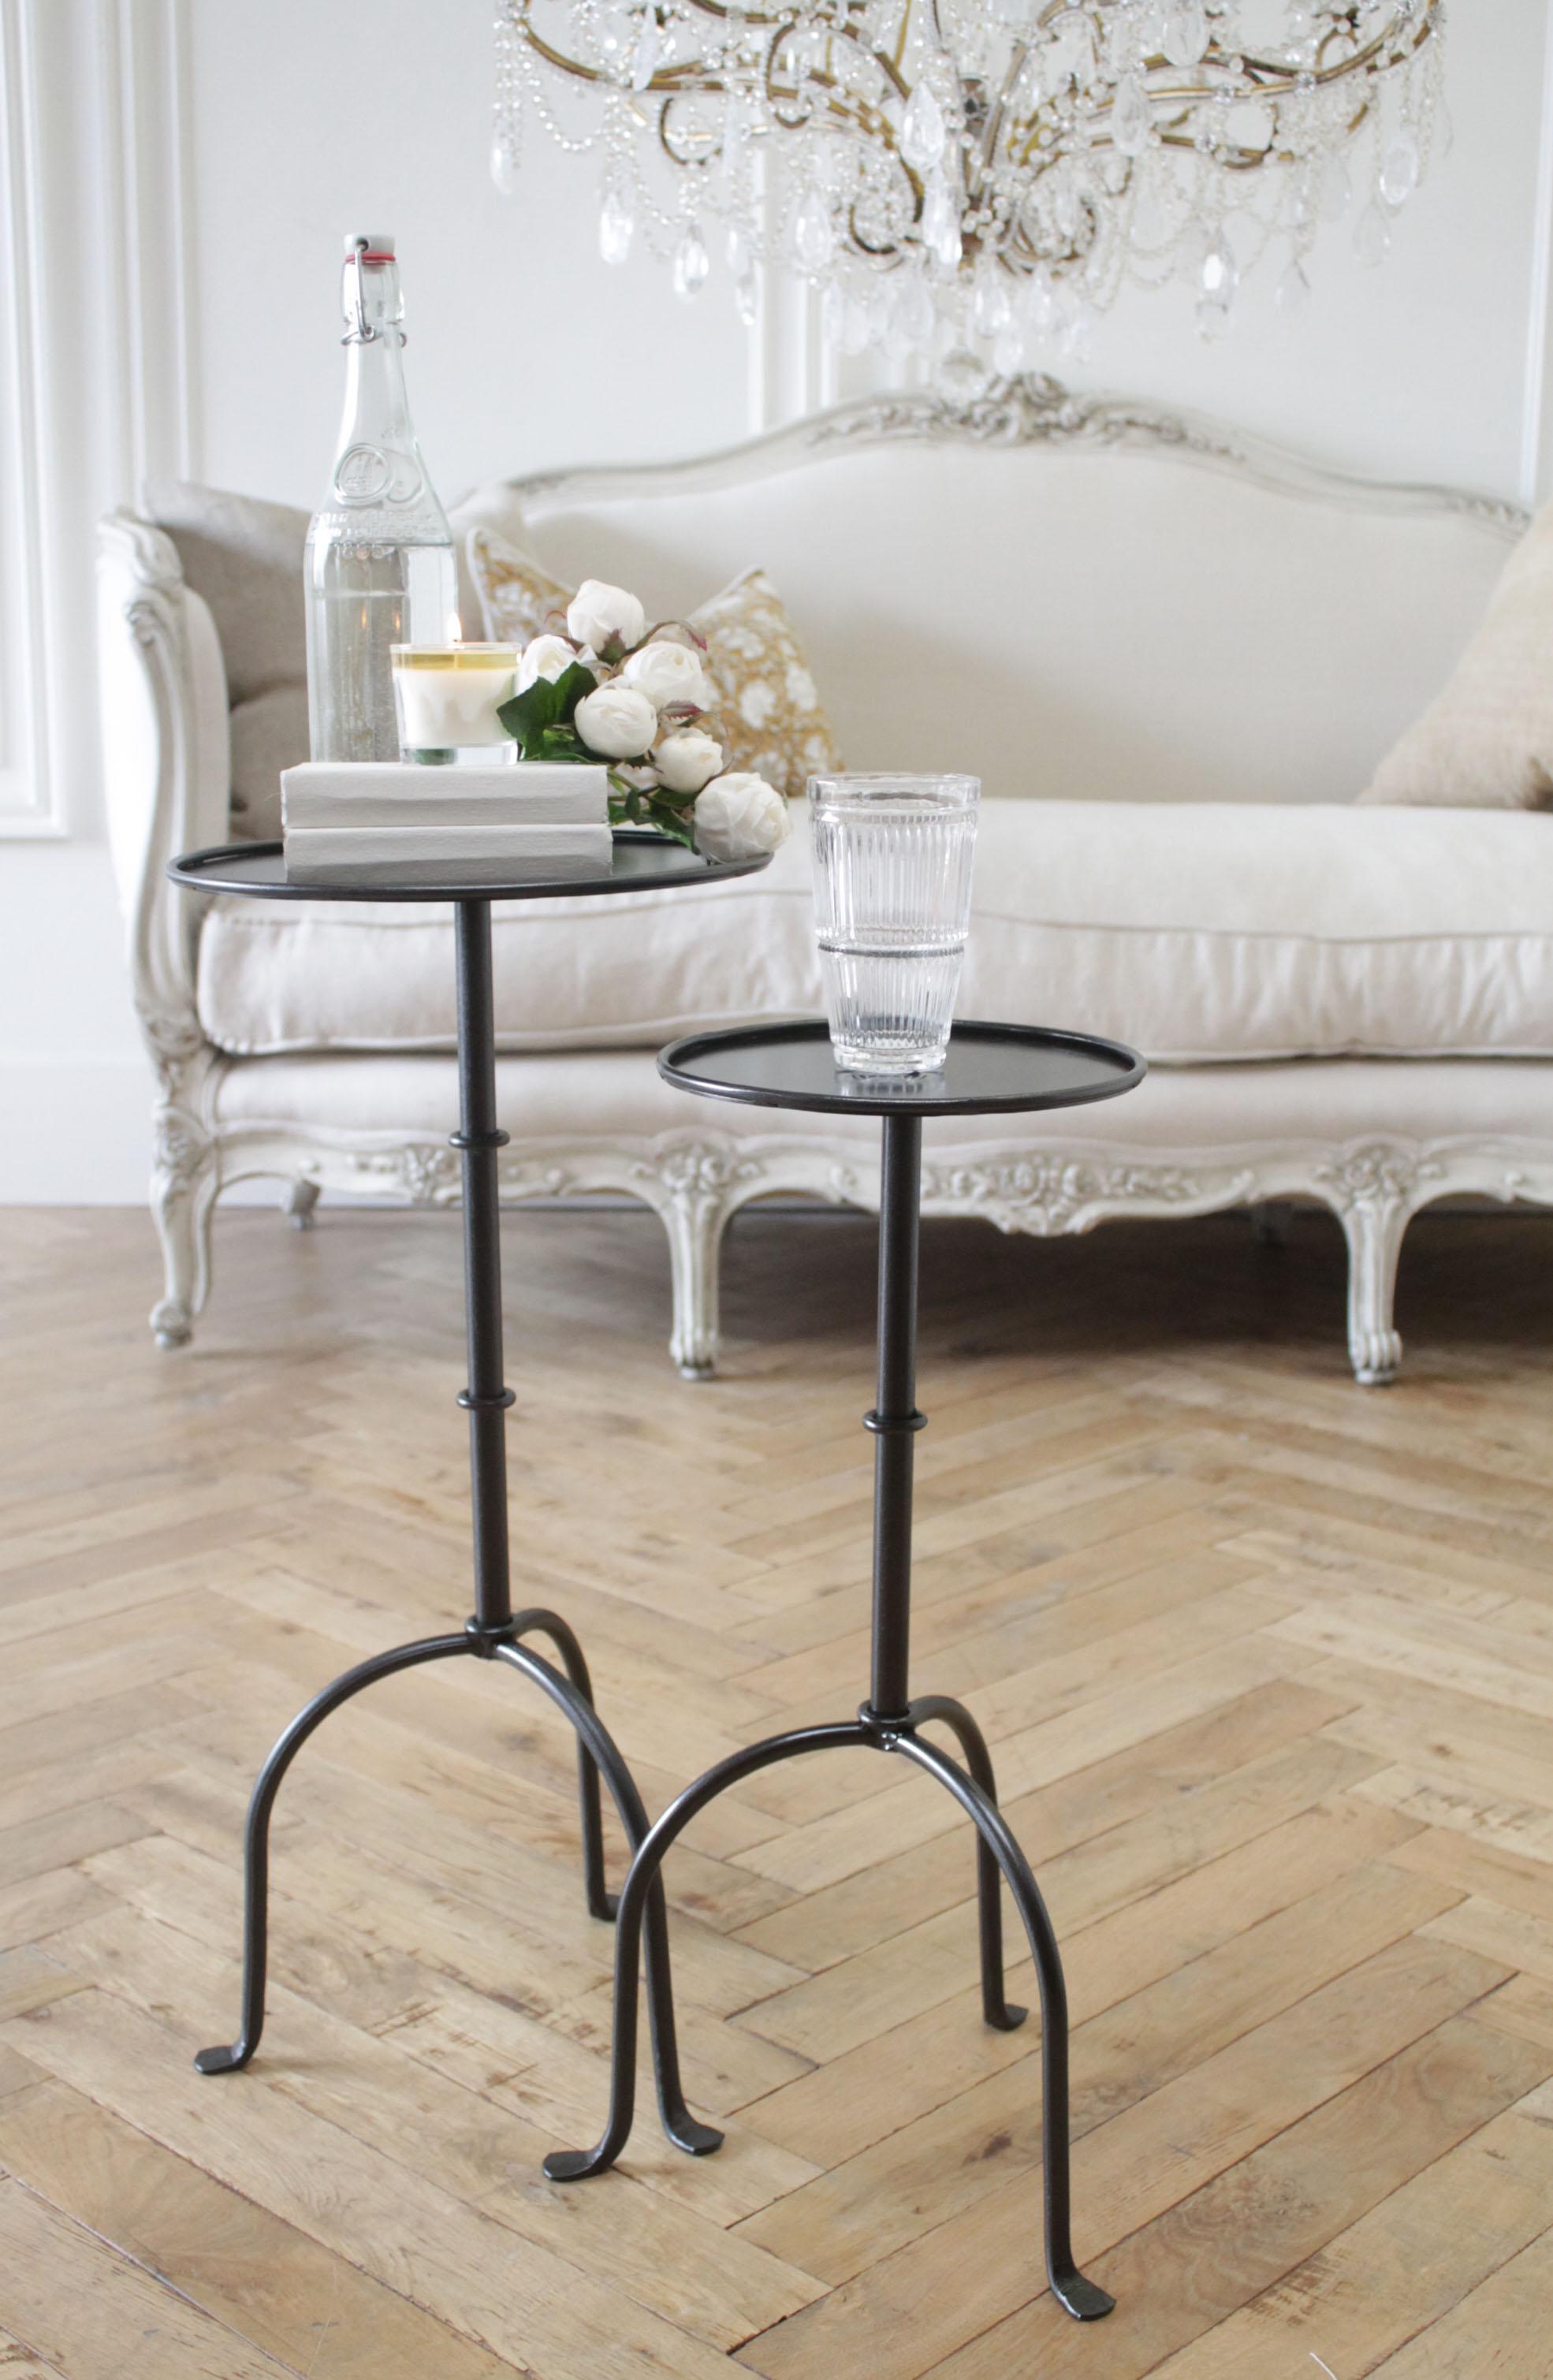 North American Cannes Tall Iron Drink Table in Iron Finish or Brass Finish